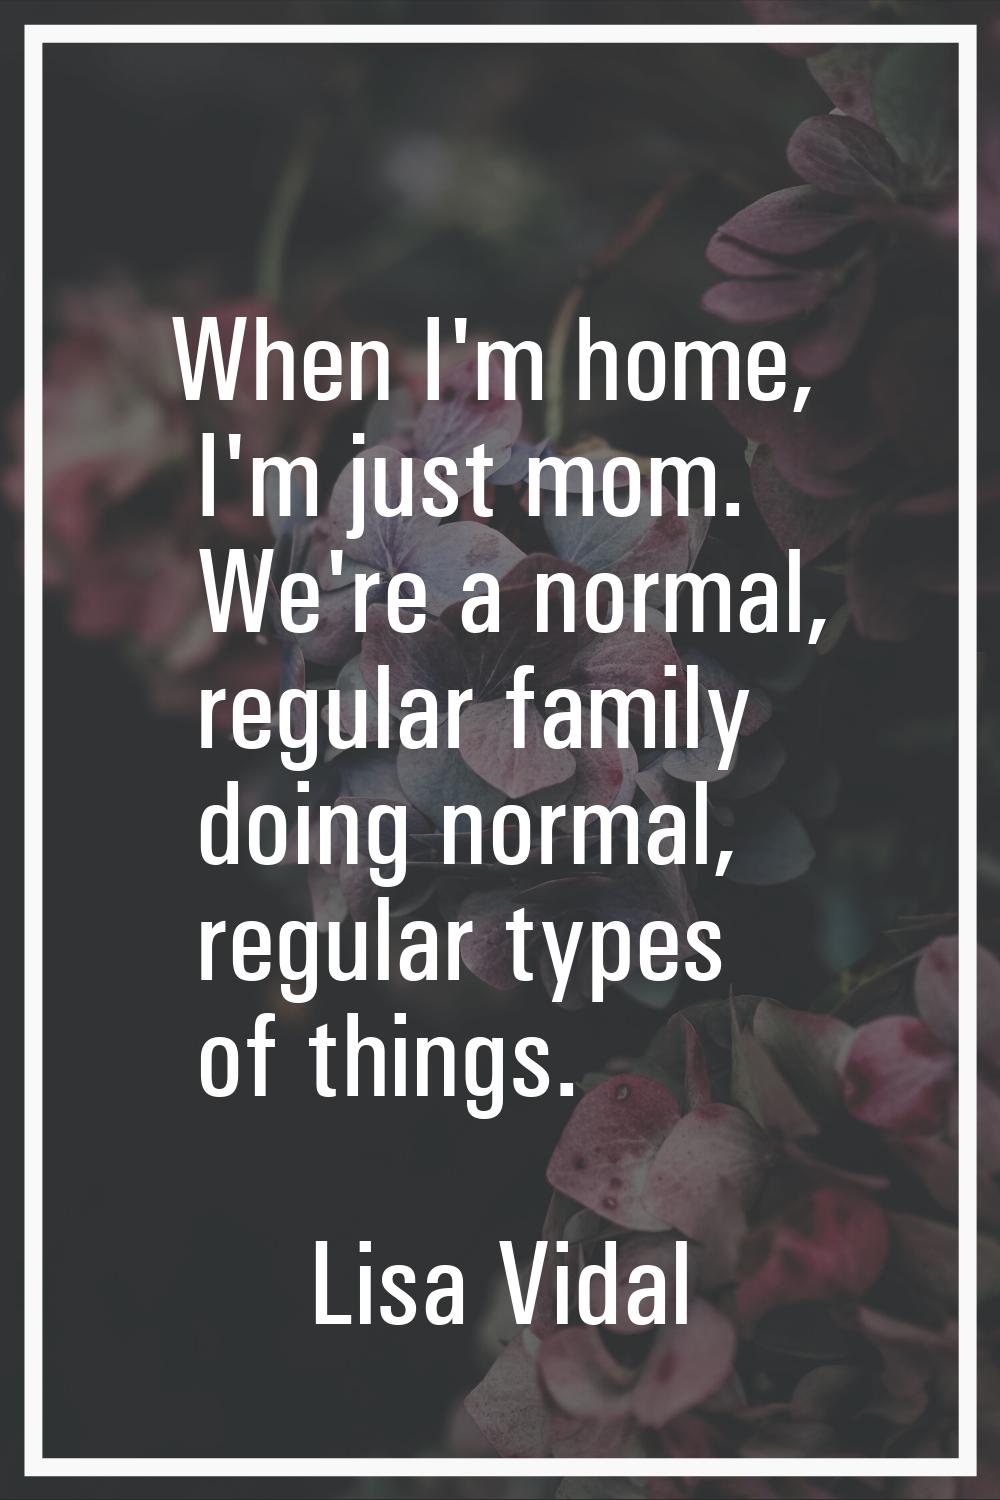 When I'm home, I'm just mom. We're a normal, regular family doing normal, regular types of things.